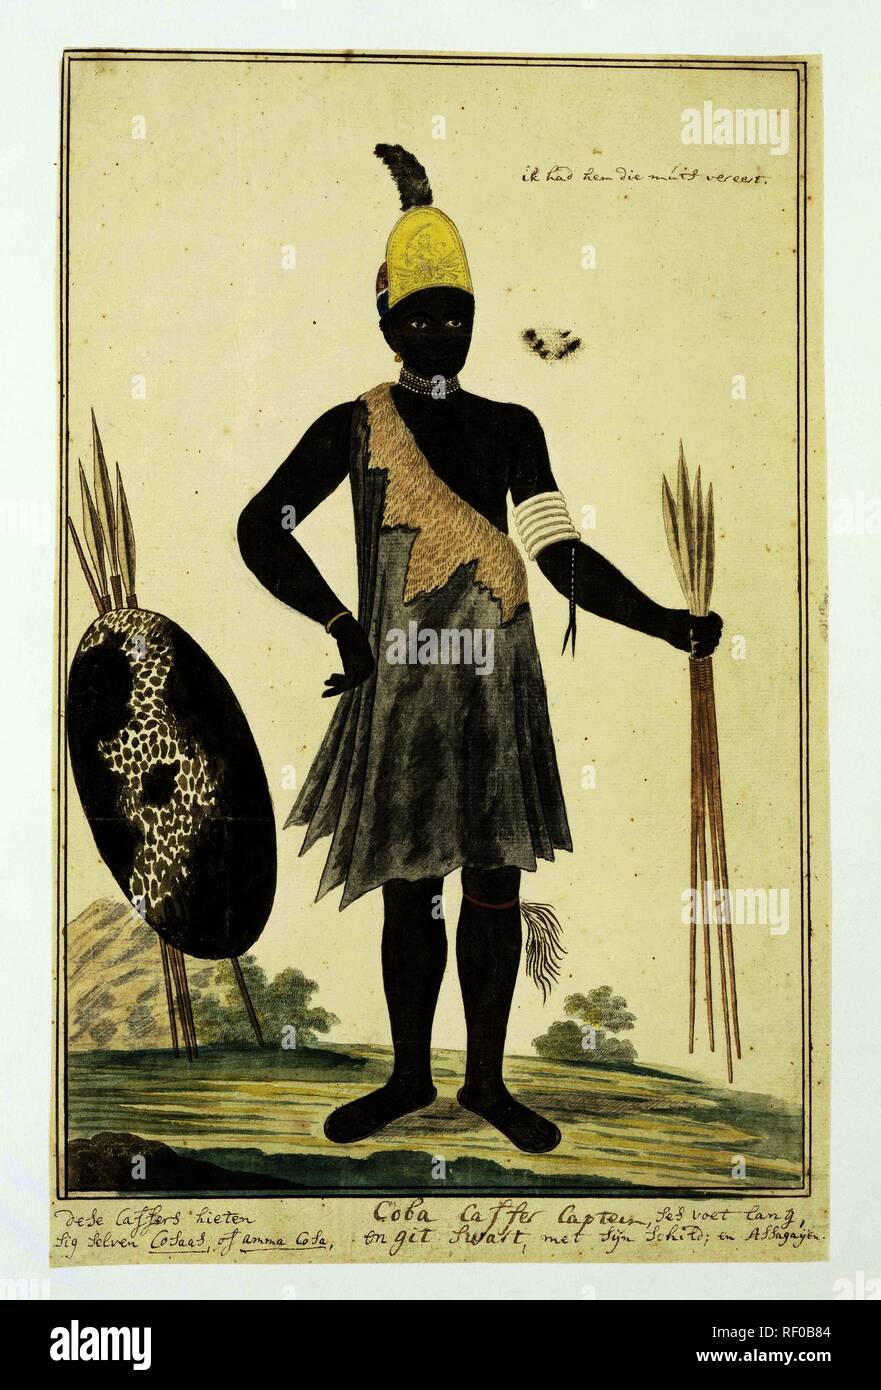 'Captain' Coba (or Kobé), a chief of the Gqunukhwebe tribe, wearing the grenadiers helmet given him by Robert Jacob Gordon. Draughtsman: Robert Jacob Gordon. Dating: 11-Dec-1777. Place: Great Fish River (South Africa). Measurements: h 660 mm × w 480 mm; h 376 mm × w 241 mm; h 350 mm × w 227 mm. Museum: Rijksmuseum, Amsterdam. Stock Photo